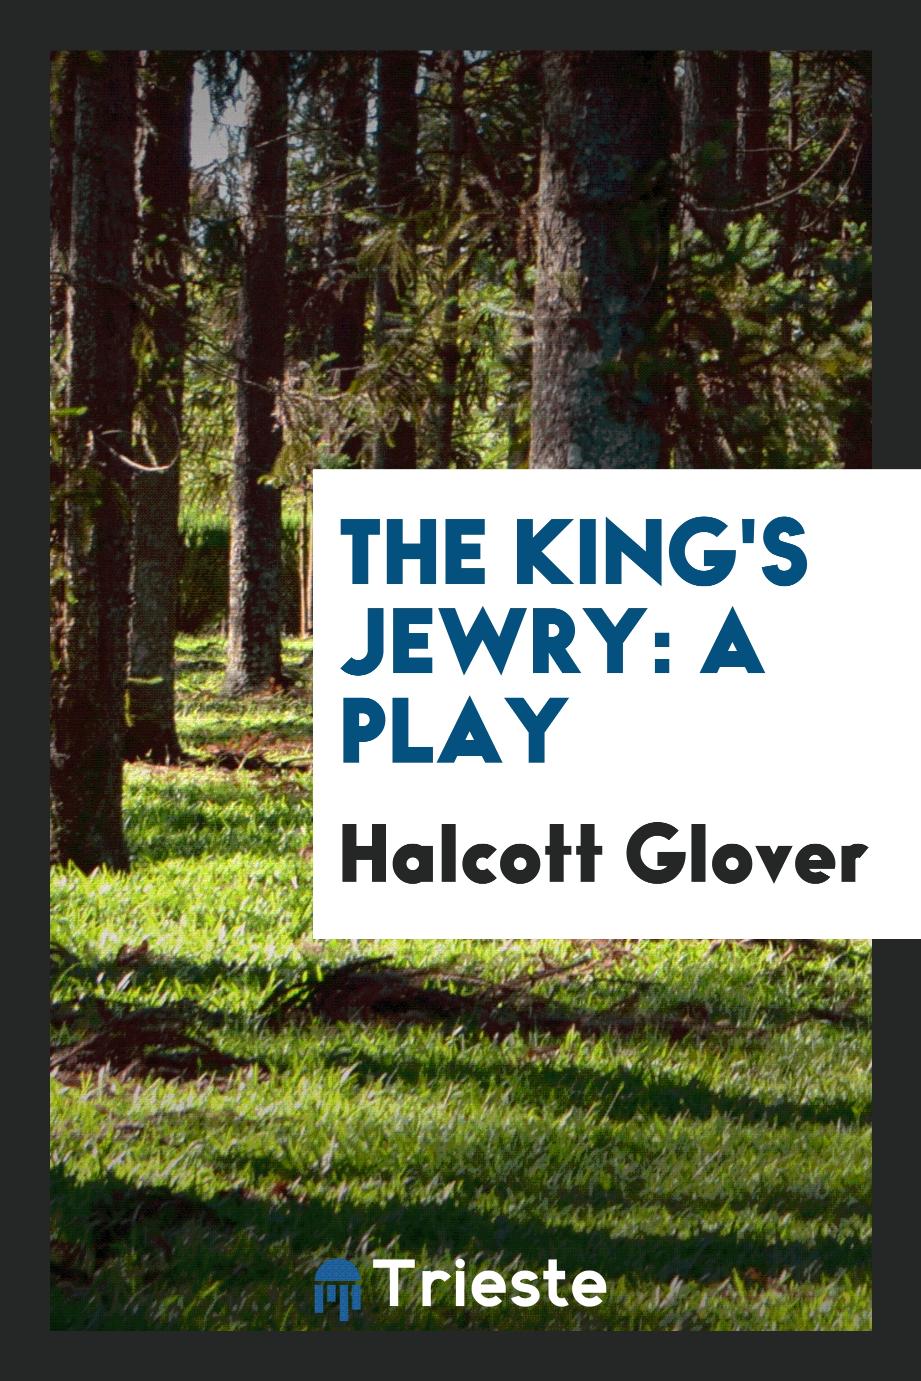 The King's Jewry: A Play